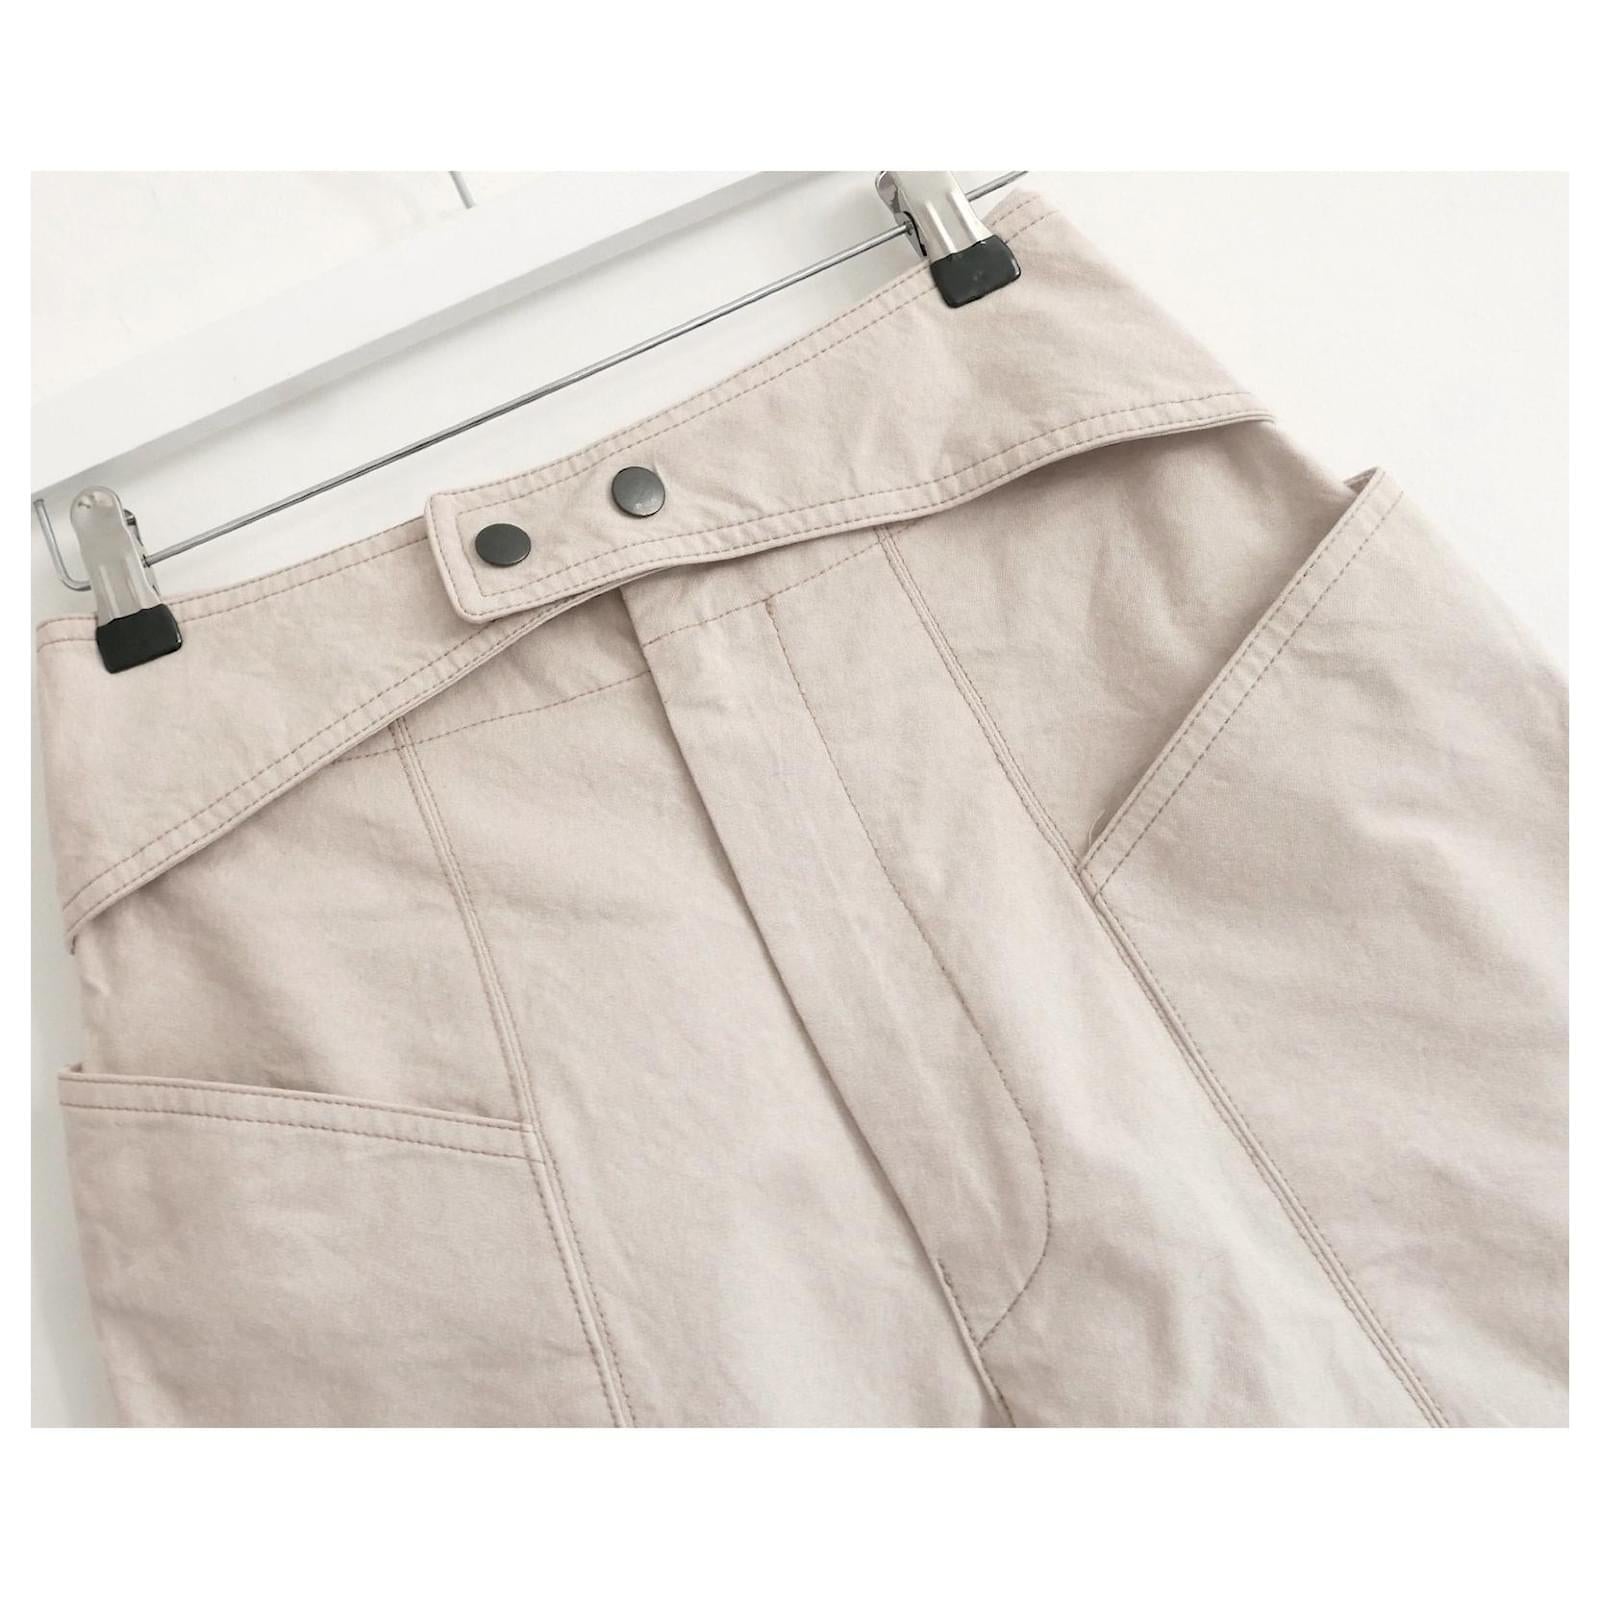 Super cool Isabel Marant jodhpur style trousers. Worn once and come with spare button. Made from soft beige cotton, they have a high waisteded with cross over cummerbund detail, large pockets and tapered legs. Size FR34/UK6. Measures approx - waist